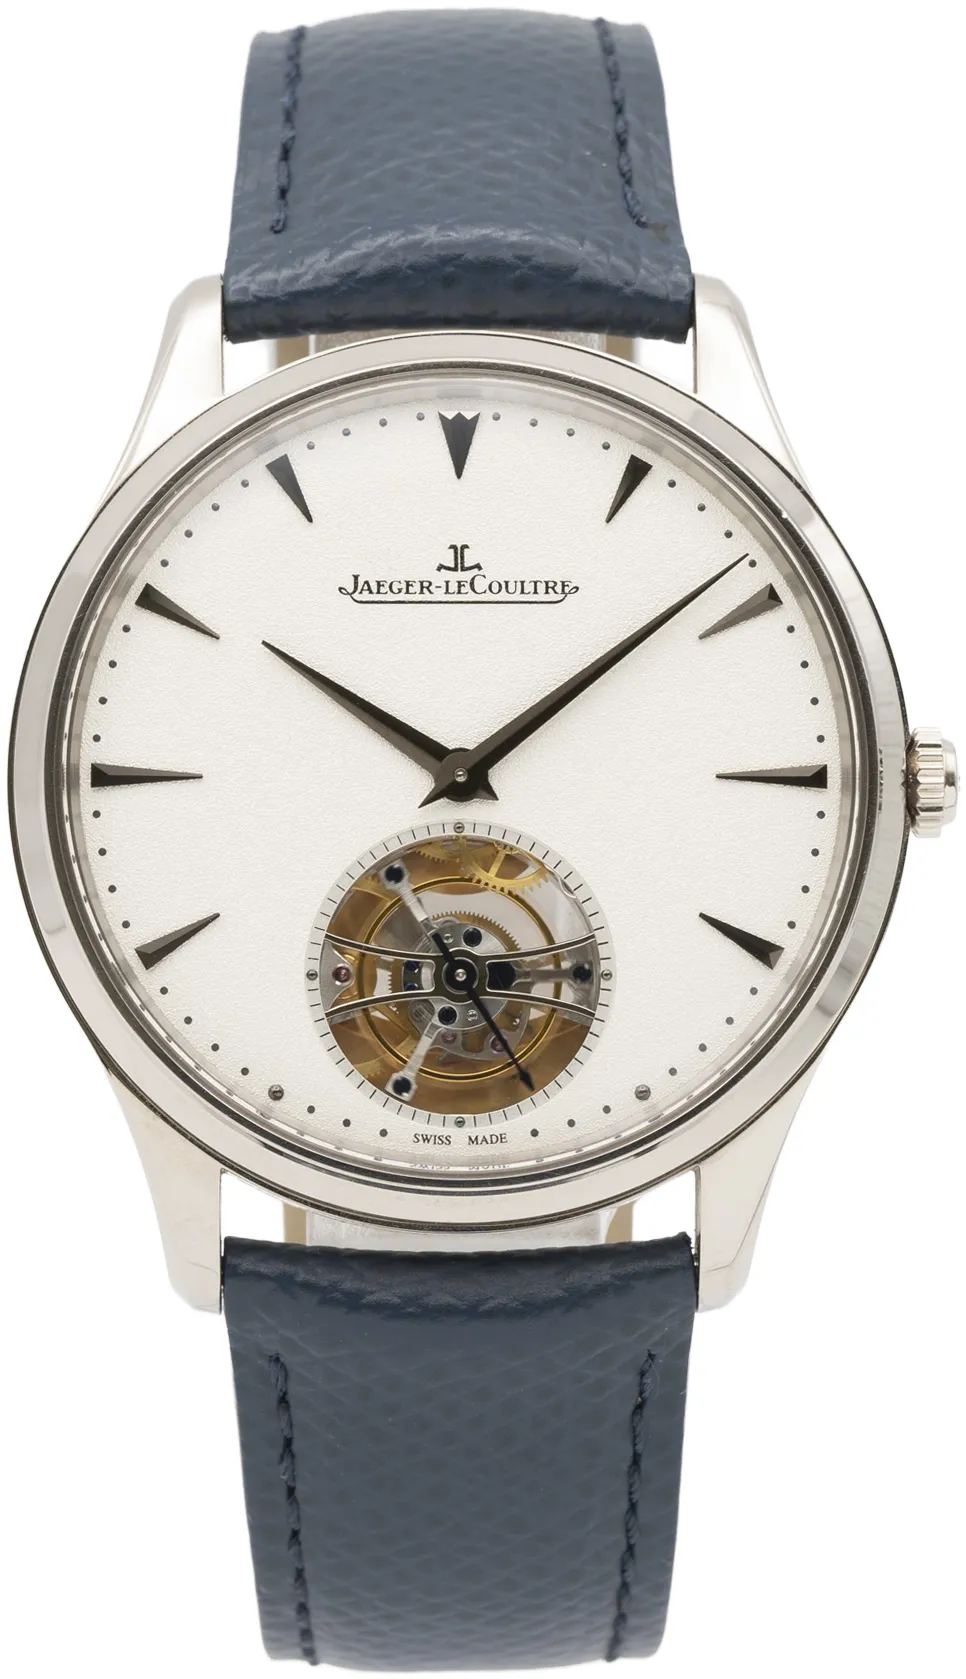 Jaeger-LeCoultre Master Ultra Thin 1323420 40mm White gold